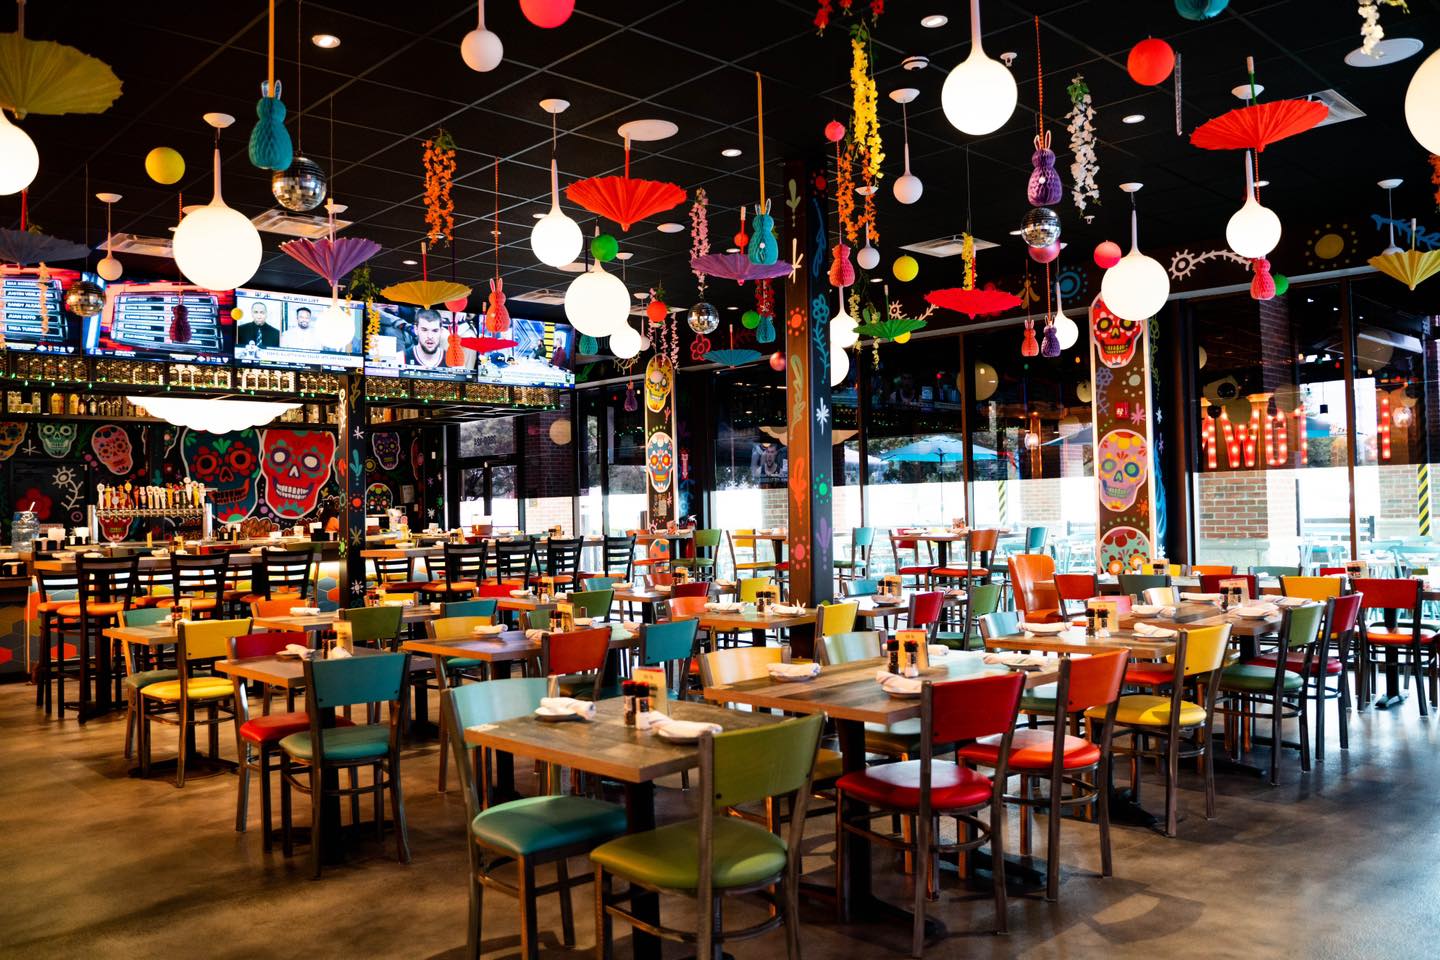 The colorful dining room at Valencia’s Tex-Mex Garage with skull-themed wallpaper and hanging ornaments from the ceiling.